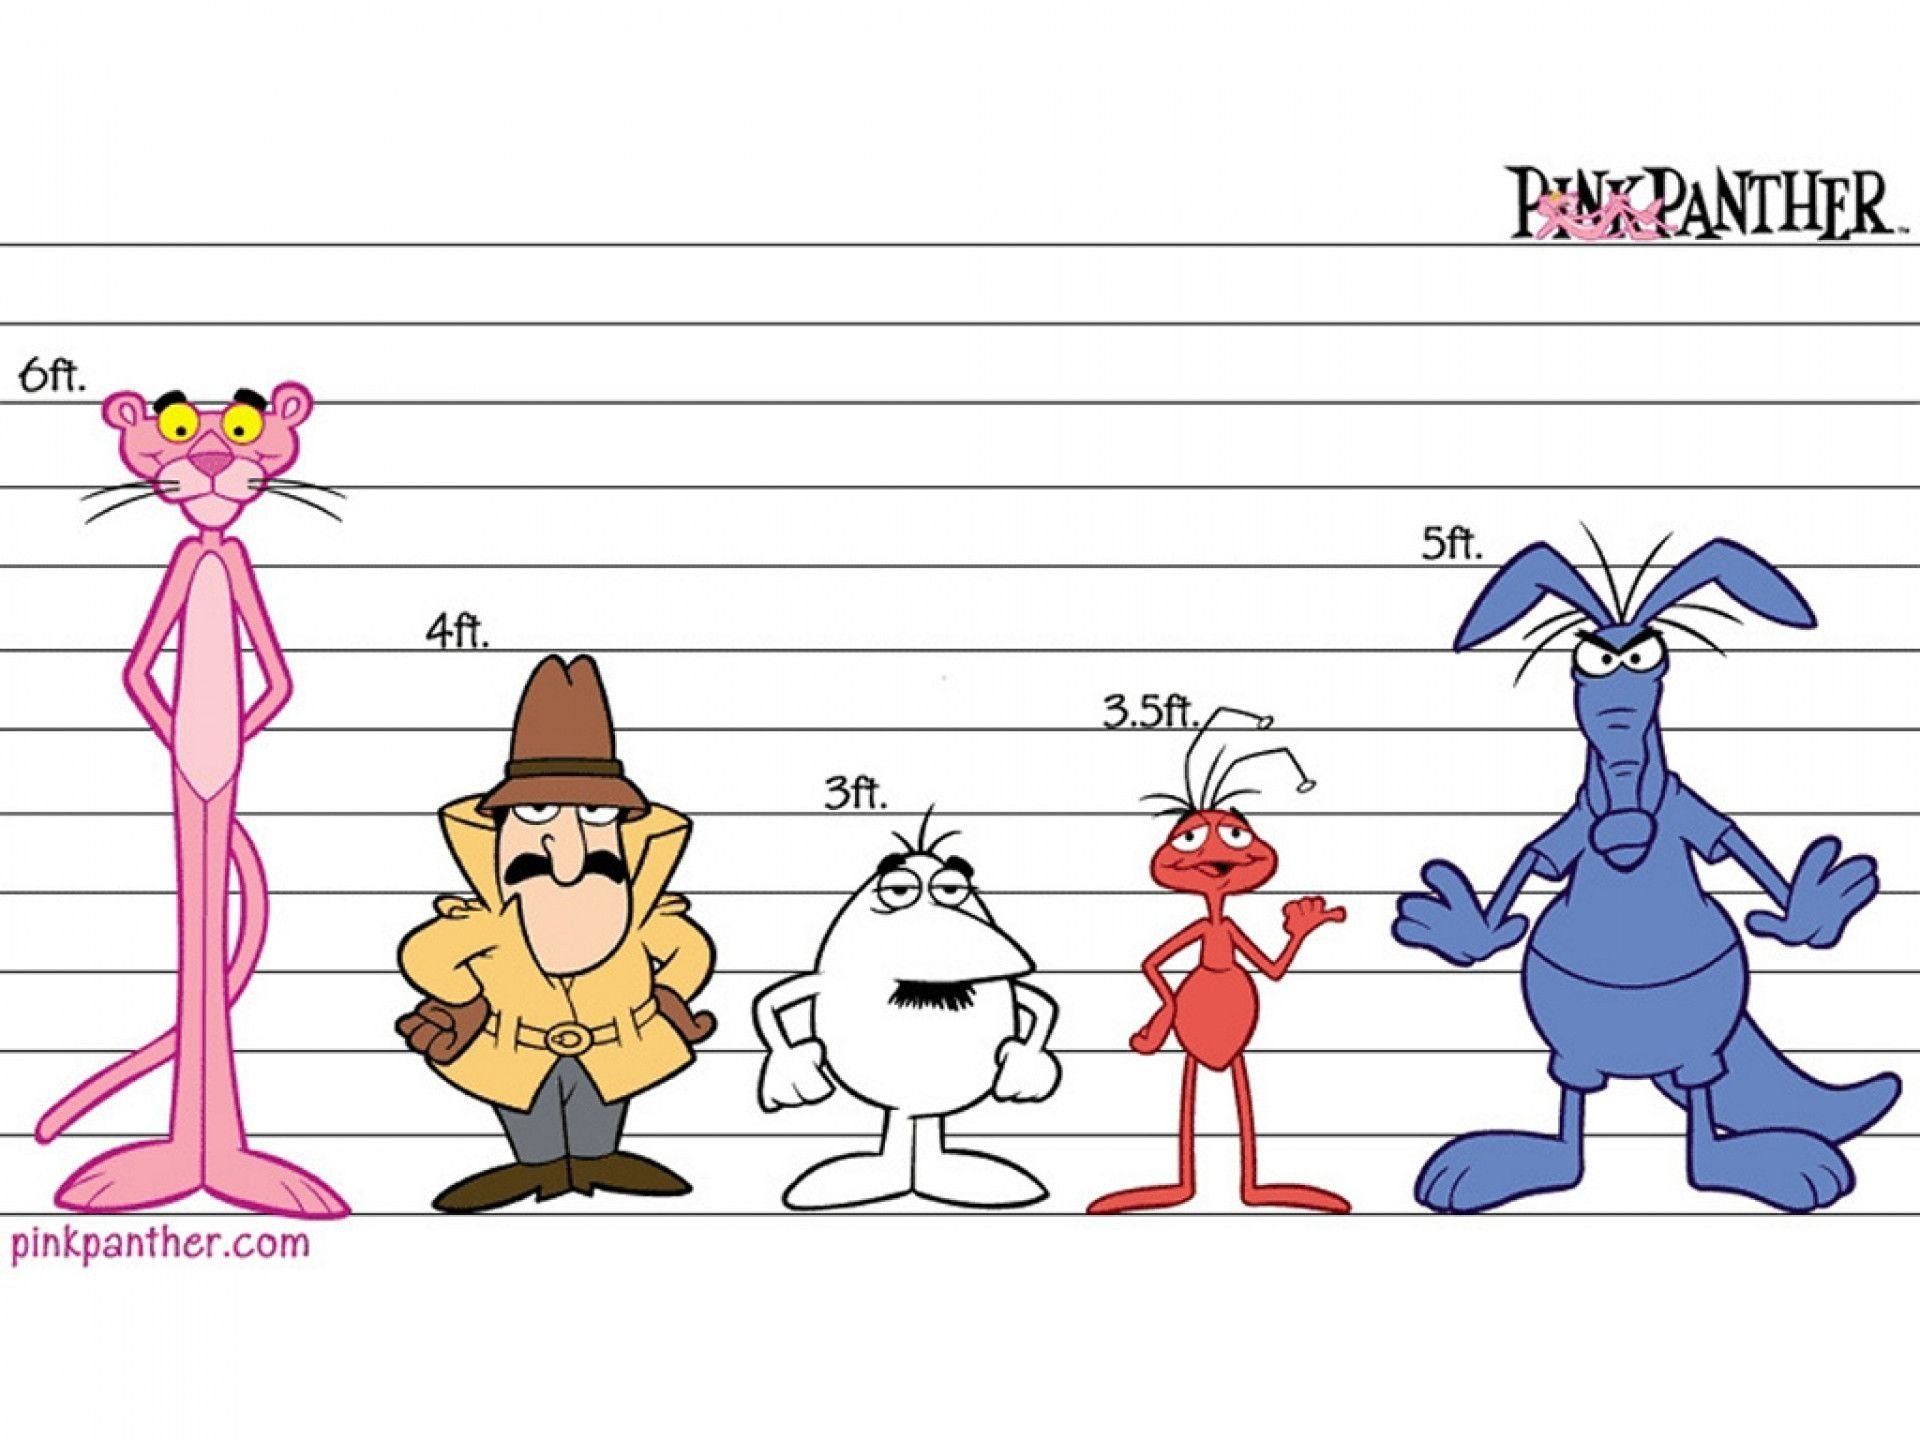 The pink panther cartoon characters in a line up - Pink Panther